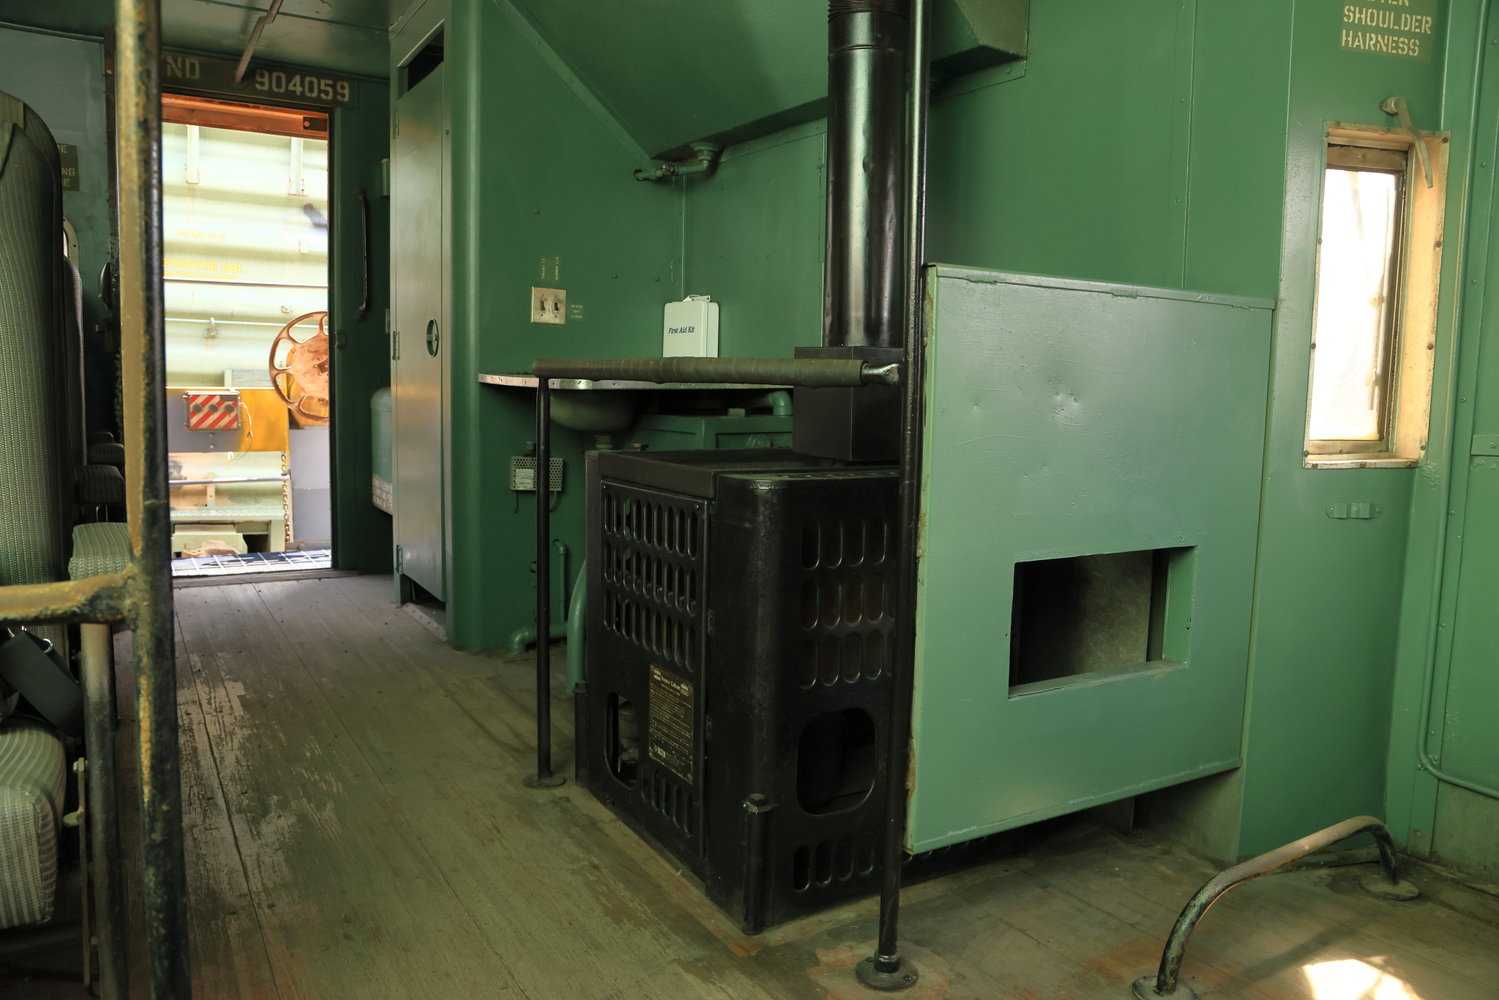 Inside Caboose No. 904059,  showing the onboard oil-fired stove.